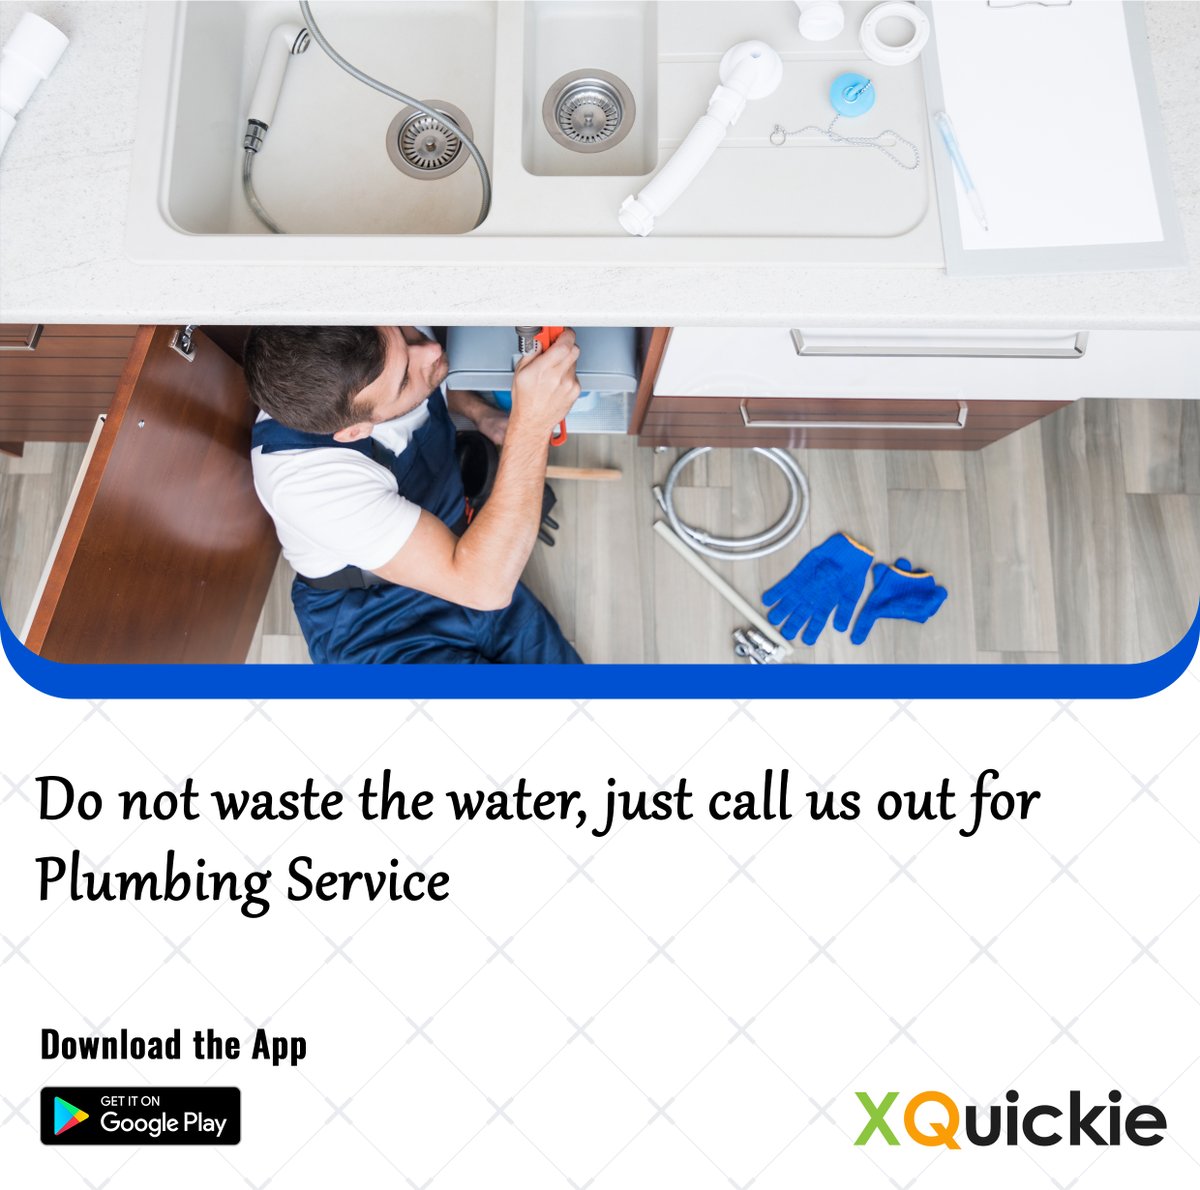 RT x.com/_xquickie/stat… Do not waste the water, just call us out for Plumbing Service! Download the XQuickie App Now!! bit.ly/XQuickie #services #servicesathome #serviceathome #plum…